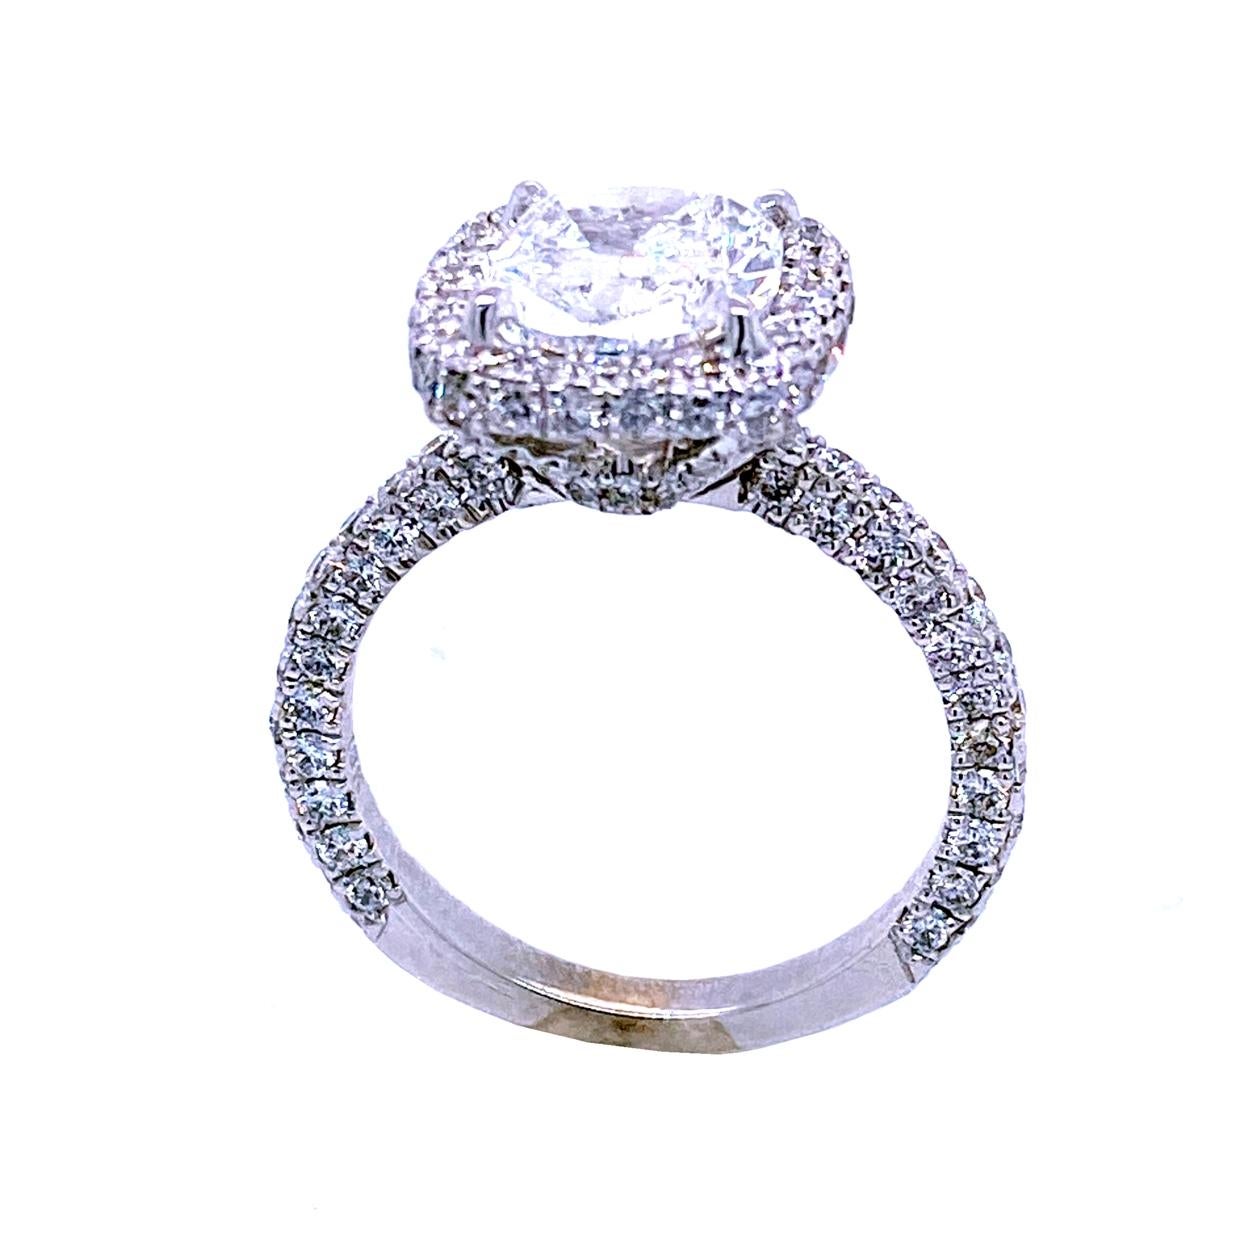 A very shiny 2.01 Ct Cushion D/SI1 GIA certified center Diamond set in a fine 18k gold Pave set Engagement Ring with a halo. You can see diamonds from all angles. Total diamond weight of 1.40 Ct. on the side. 

Diamond specs:
Center stone: 2.01 Ct